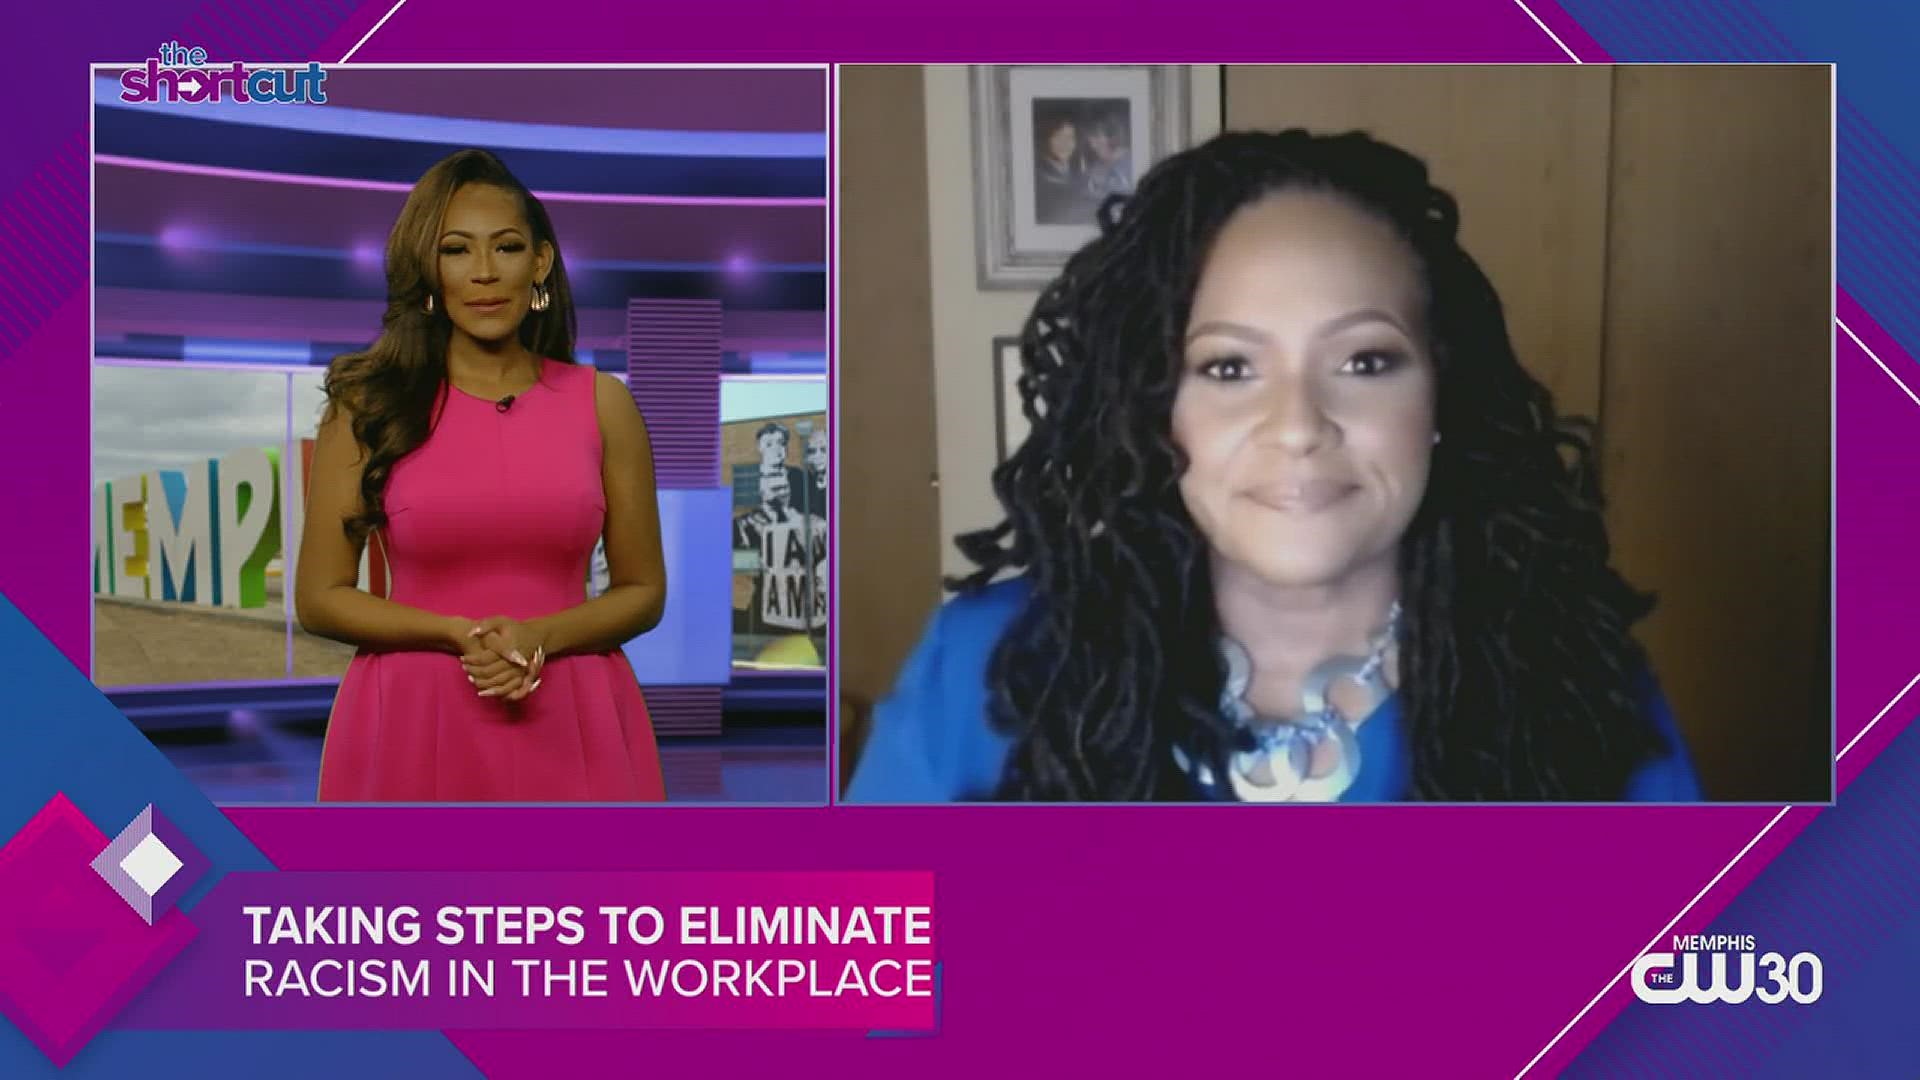 From spotting misused phrases to developing allyship skills, join Sydney Neely and Dr. Kimberly Harden as we take a look at how to eliminate racism in the workplace!